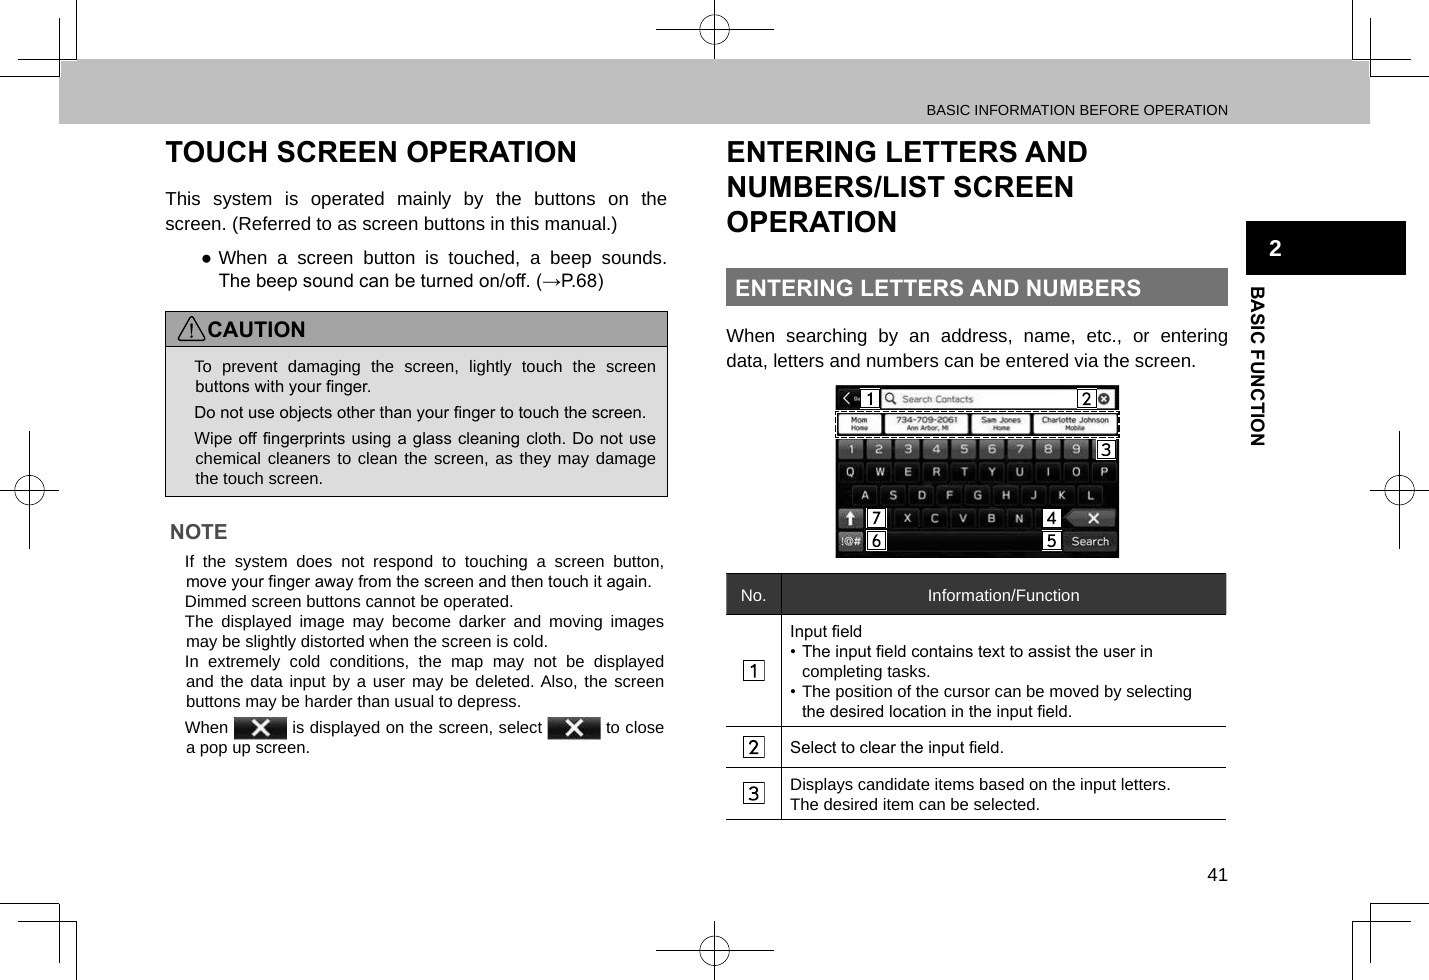 BASIC INFORMATION BEFORE OPERATION41BASIC FUNCTION2TOUCH SCREEN OPERATIONThis system is operated mainly by the buttons on the screen. (Referred to as screen buttons in this manual.) ●When a screen button is touched, a beep sounds. The beep sound can be turned on/off. (→P.68)CAUTION lTo prevent damaging the screen, lightly touch the screen buttons with your nger. lDo not use objects other than your nger to touch the screen. lWipe off ngerprints using a glass cleaning cloth. Do not use chemical cleaners to clean the screen, as they may damage the touch screen.NOTE lIf the system does not respond to touching a screen button, move your nger away from the screen and then touch it again. lDimmed screen buttons cannot be operated. lThe displayed image may become darker and moving images may be slightly distorted when the screen is cold. lIn extremely cold conditions, the map may not be displayed and the data input by a user may be deleted. Also, the screen buttons may be harder than usual to depress. lWhen   is displayed on the screen, select   to close a pop up screen.ENTERING LETTERS AND NUMBERS/LIST SCREEN OPERATIONENTERING LETTERS AND NUMBERSWhen searching by an address, name, etc., or entering data, letters and numbers can be entered via the screen.No. Information/FunctionInput eld• The input eld contains text to assist the user in completing tasks.• The position of the cursor can be moved by selecting the desired location in the input eld.Select to clear the input eld.Displays candidate items based on the input letters.The desired item can be selected.